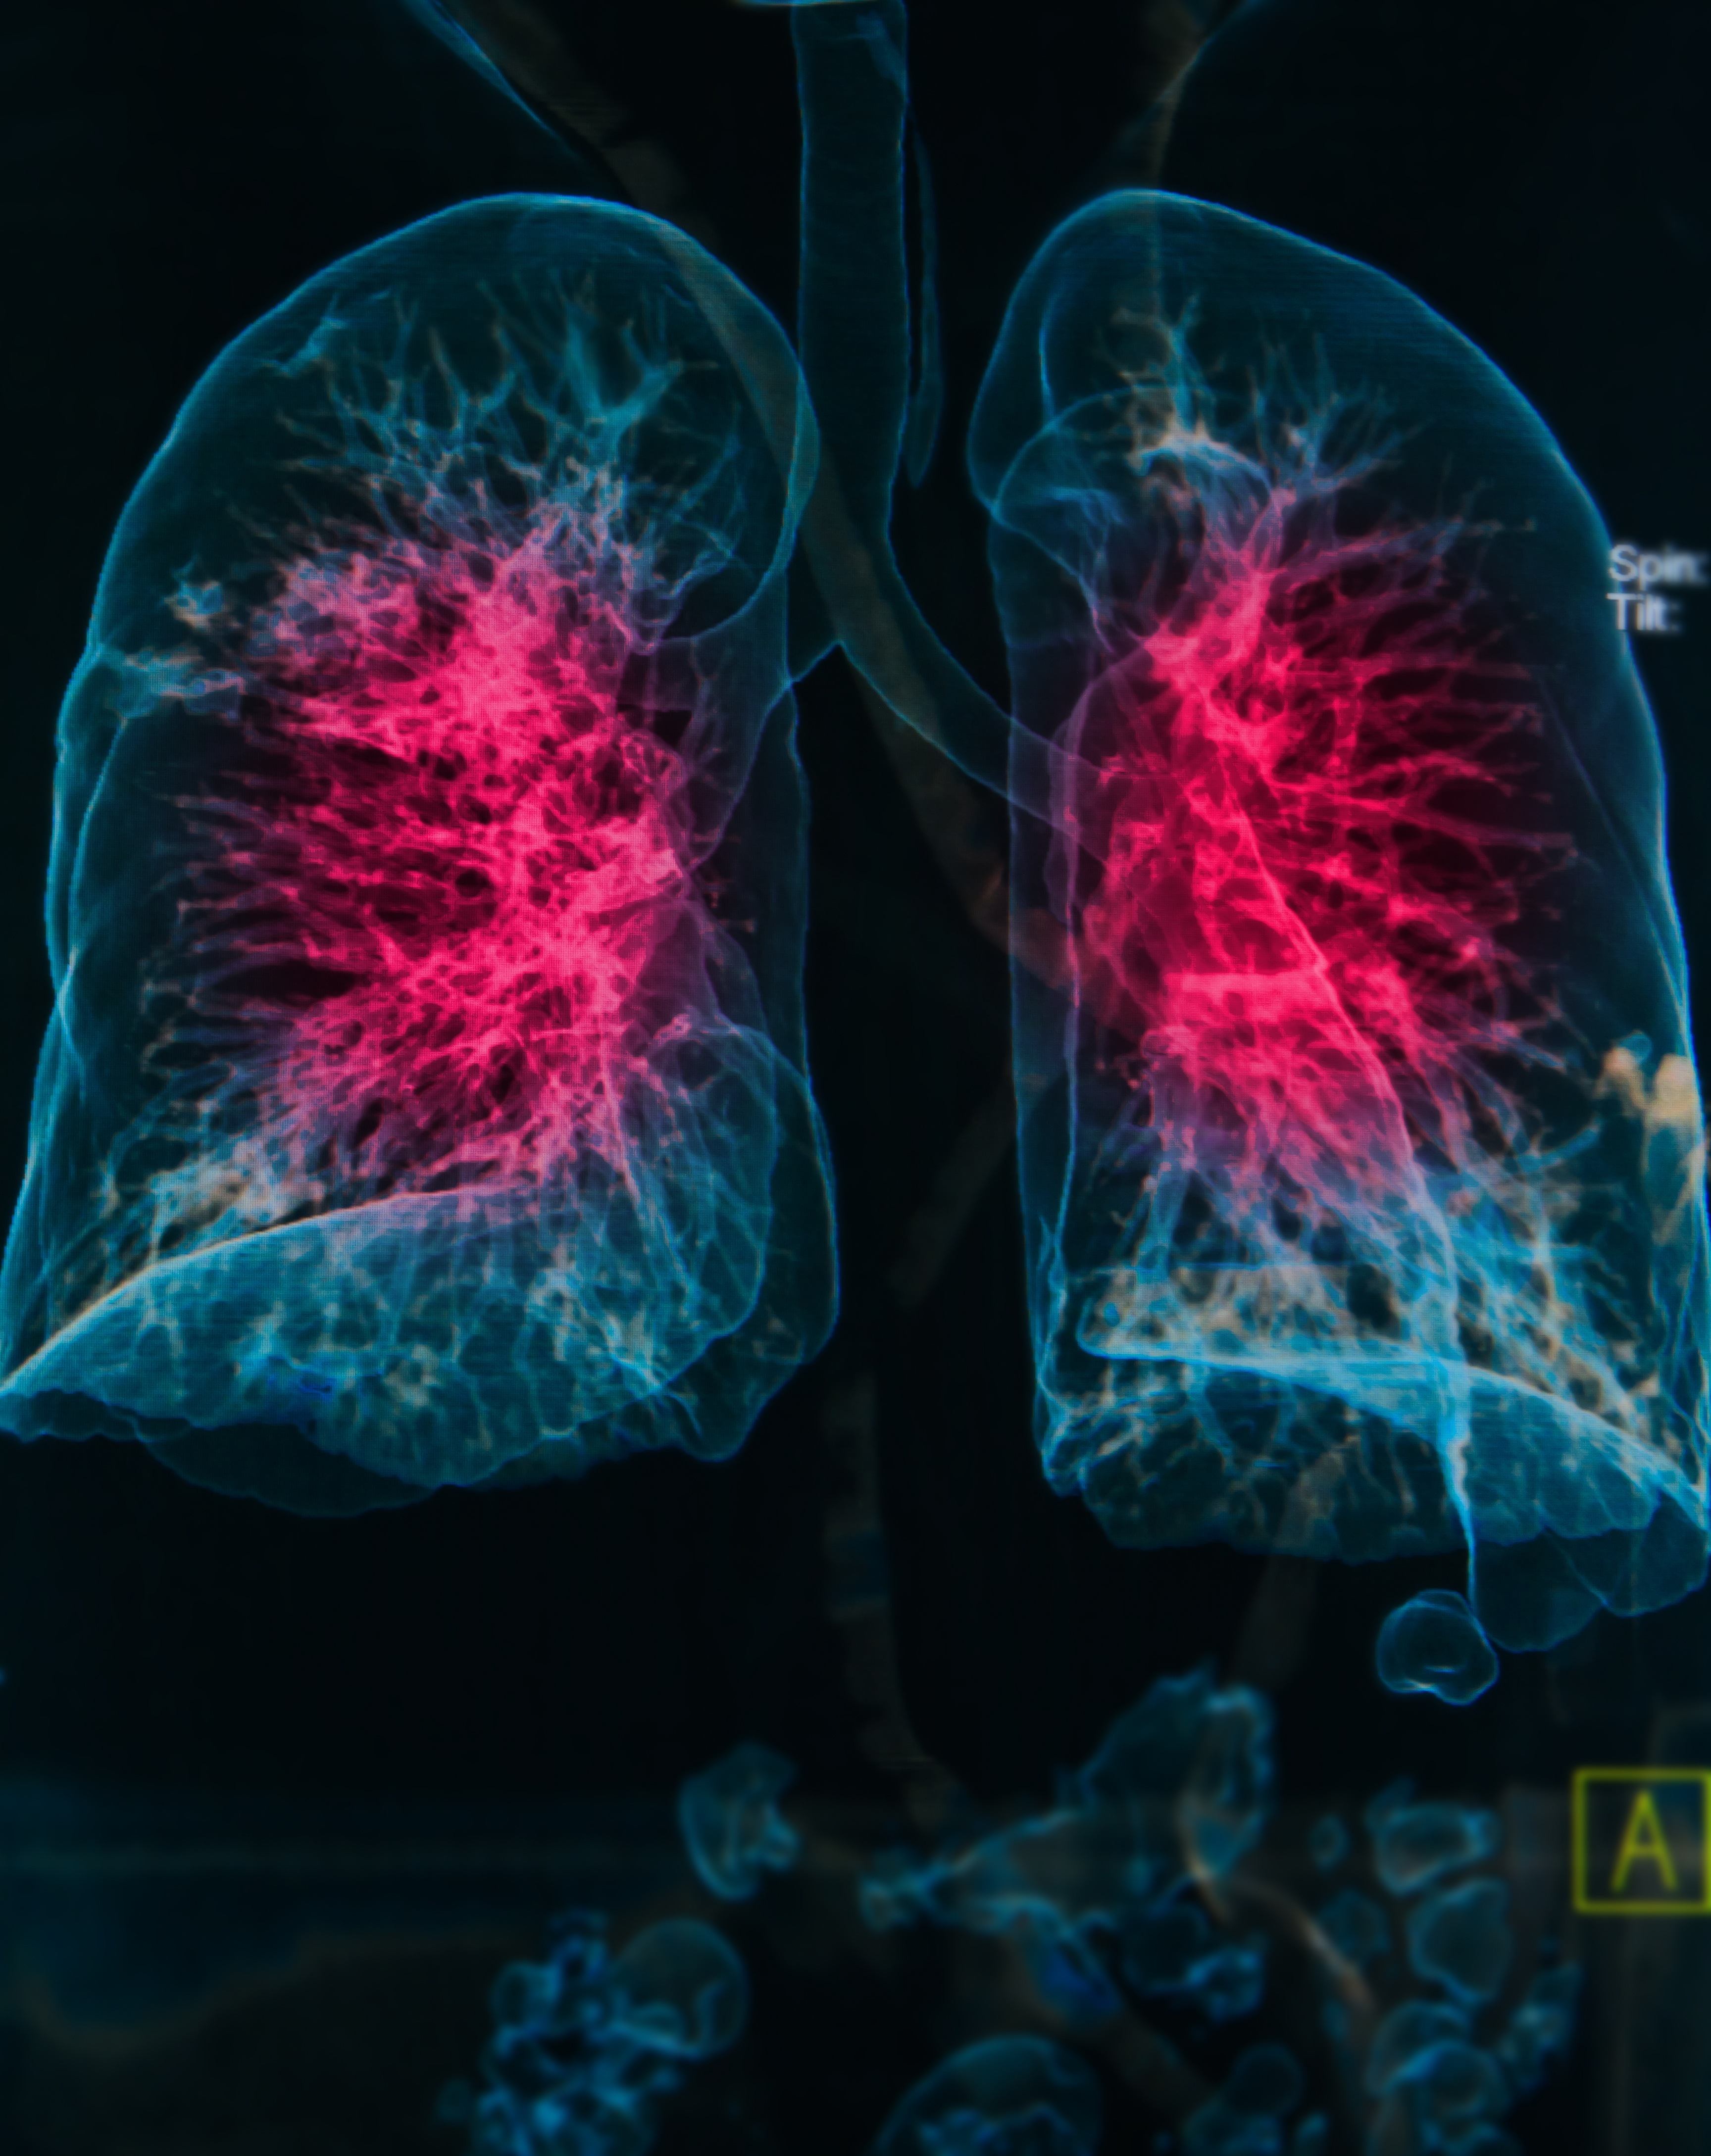 Scleroderma and interstitial lung disease